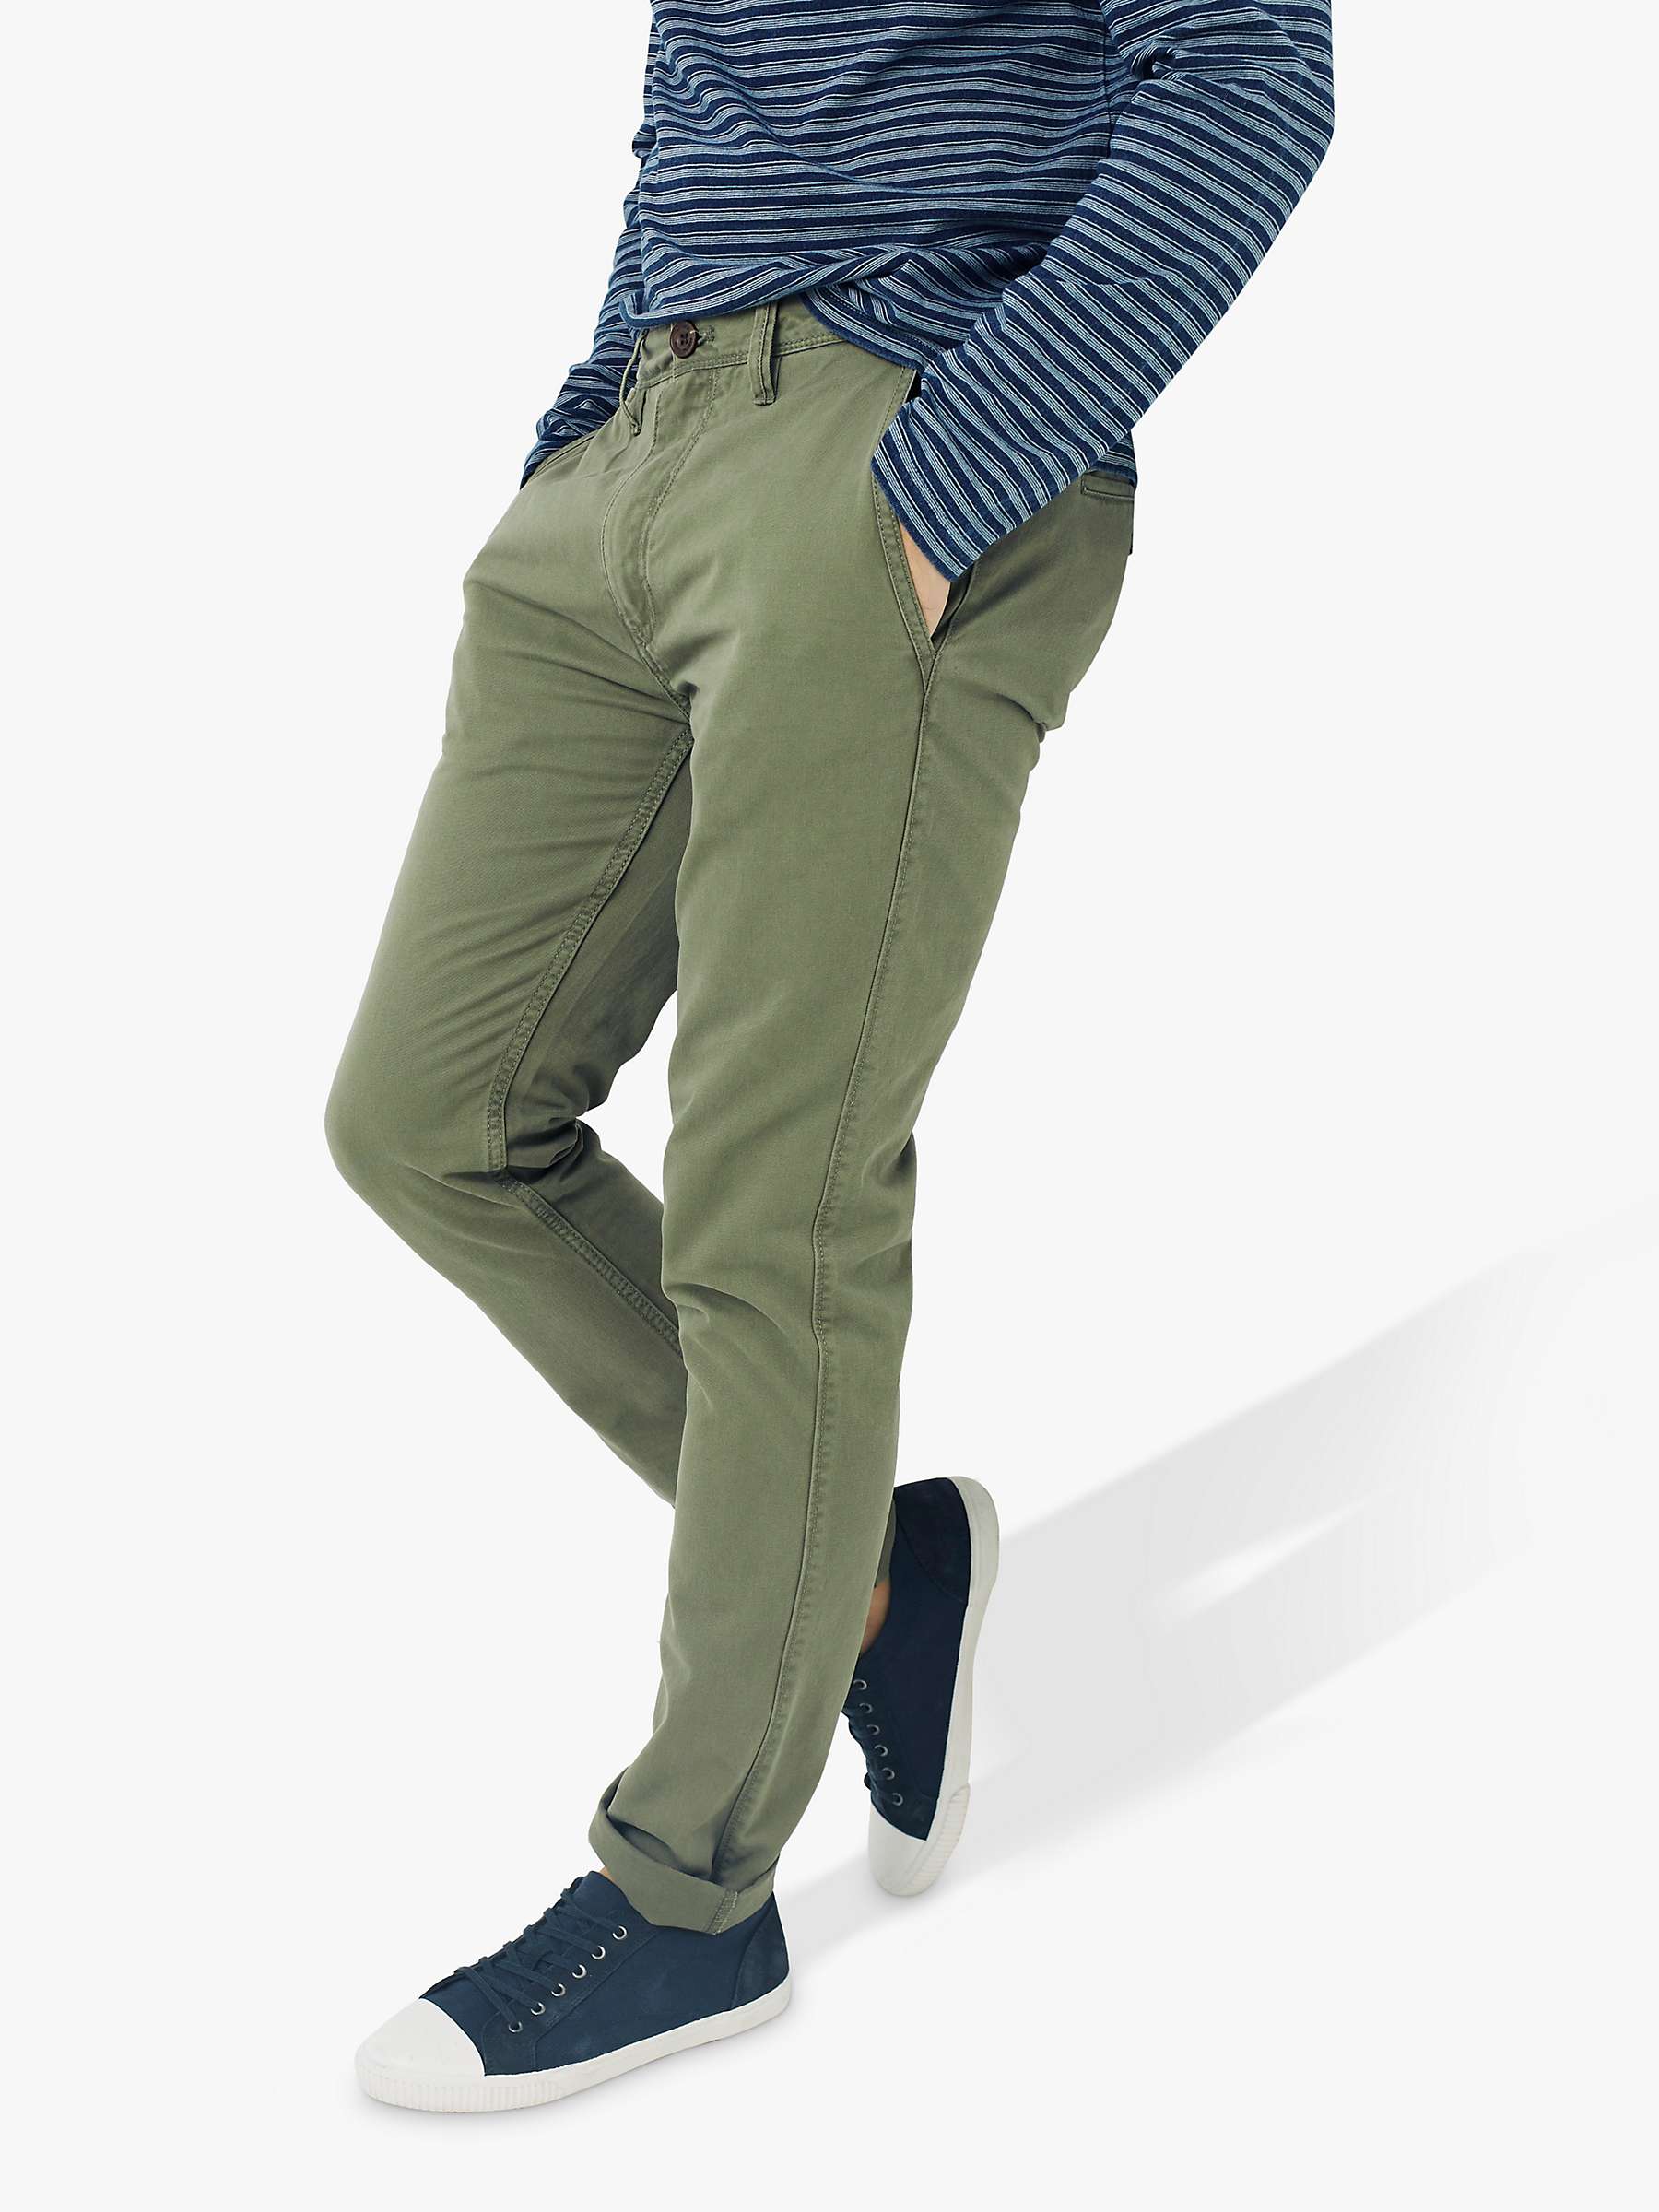 Buy FatFace Coastal Straight Fit Chinos Online at johnlewis.com